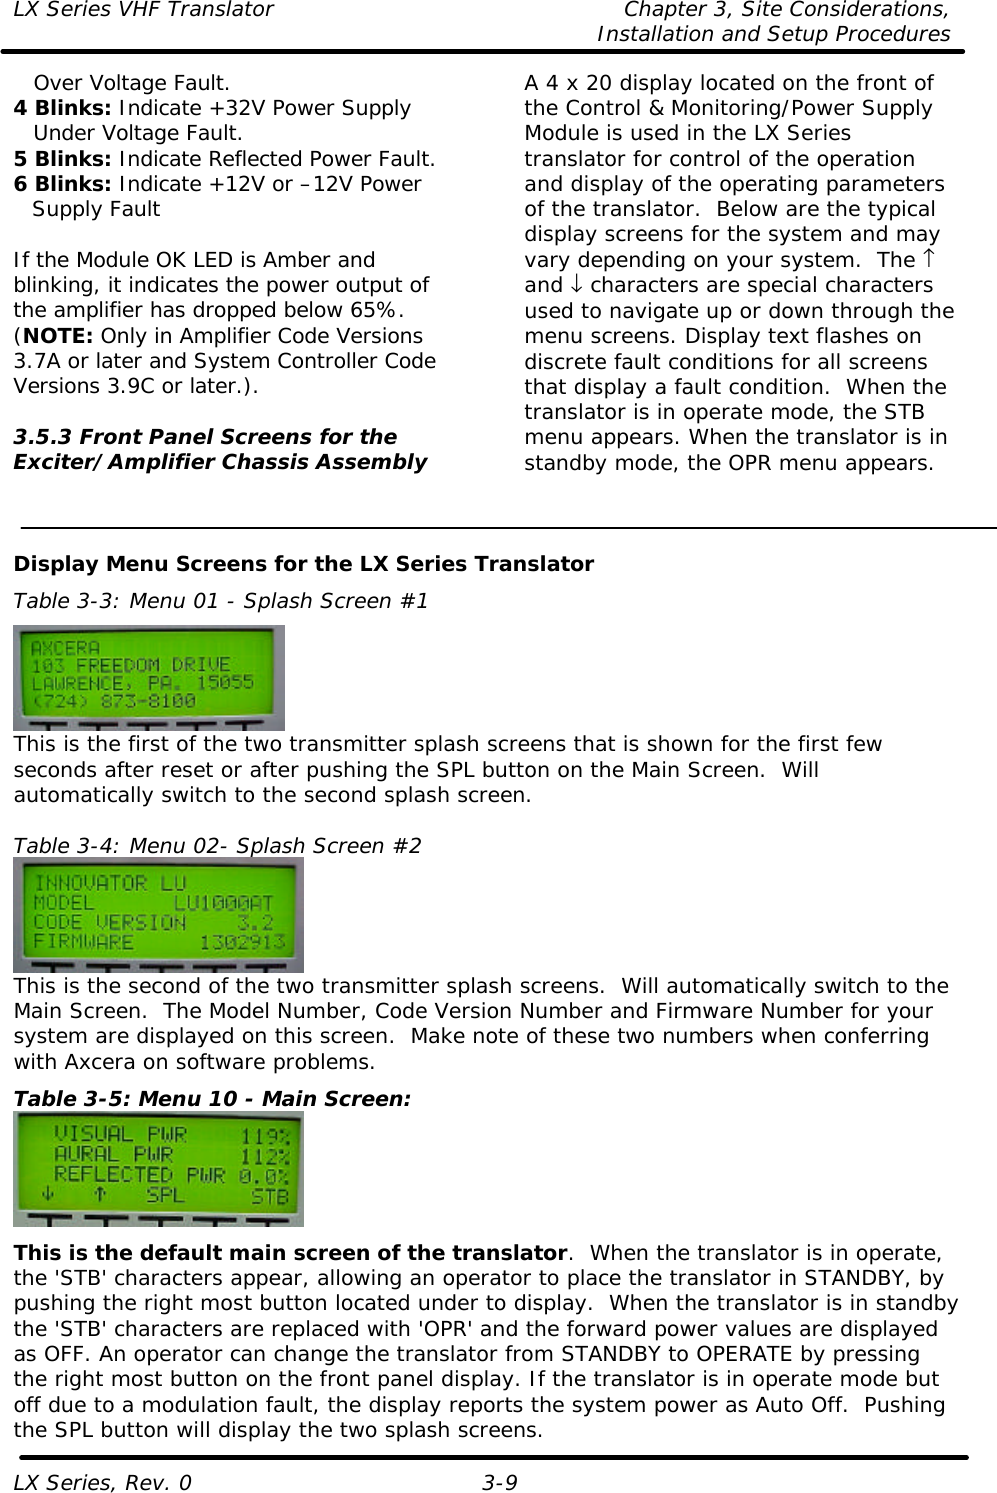 LX Series VHF Translator Chapter 3, Site Considerations,   Installation and Setup Procedures LX Series, Rev. 0 3-9  Over Voltage Fault. 4 Blinks: Indicate +32V Power Supply  Under Voltage Fault. 5 Blinks: Indicate Reflected Power Fault. 6 Blinks: Indicate +12V or –12V Power Supply Fault  If the Module OK LED is Amber and blinking, it indicates the power output of the amplifier has dropped below 65%.  (NOTE: Only in Amplifier Code Versions 3.7A or later and System Controller Code Versions 3.9C or later.).  3.5.3 Front Panel Screens for the Exciter/Amplifier Chassis Assembly  A 4 x 20 display located on the front of the Control &amp; Monitoring/Power Supply Module is used in the LX Series translator for control of the operation and display of the operating parameters of the translator.  Below are the typical display screens for the system and may vary depending on your system.  The ↑ and ↓ characters are special characters used to navigate up or down through the menu screens. Display text flashes on discrete fault conditions for all screens that display a fault condition.  When the translator is in operate mode, the STB menu appears. When the translator is in standby mode, the OPR menu appears.   Display Menu Screens for the LX Series Translator Table 3-3: Menu 01 - Splash Screen #1  This is the first of the two transmitter splash screens that is shown for the first few seconds after reset or after pushing the SPL button on the Main Screen.  Will automatically switch to the second splash screen.  Table 3-4: Menu 02- Splash Screen #2  This is the second of the two transmitter splash screens.  Will automatically switch to the Main Screen.  The Model Number, Code Version Number and Firmware Number for your system are displayed on this screen.  Make note of these two numbers when conferring with Axcera on software problems. Table 3-5: Menu 10 - Main Screen:  This is the default main screen of the translator.  When the translator is in operate, the &apos;STB&apos; characters appear, allowing an operator to place the translator in STANDBY, by pushing the right most button located under to display.  When the translator is in standby the &apos;STB&apos; characters are replaced with &apos;OPR&apos; and the forward power values are displayed as OFF. An operator can change the translator from STANDBY to OPERATE by pressing the right most button on the front panel display. If the translator is in operate mode but off due to a modulation fault, the display reports the system power as Auto Off.  Pushing the SPL button will display the two splash screens. 